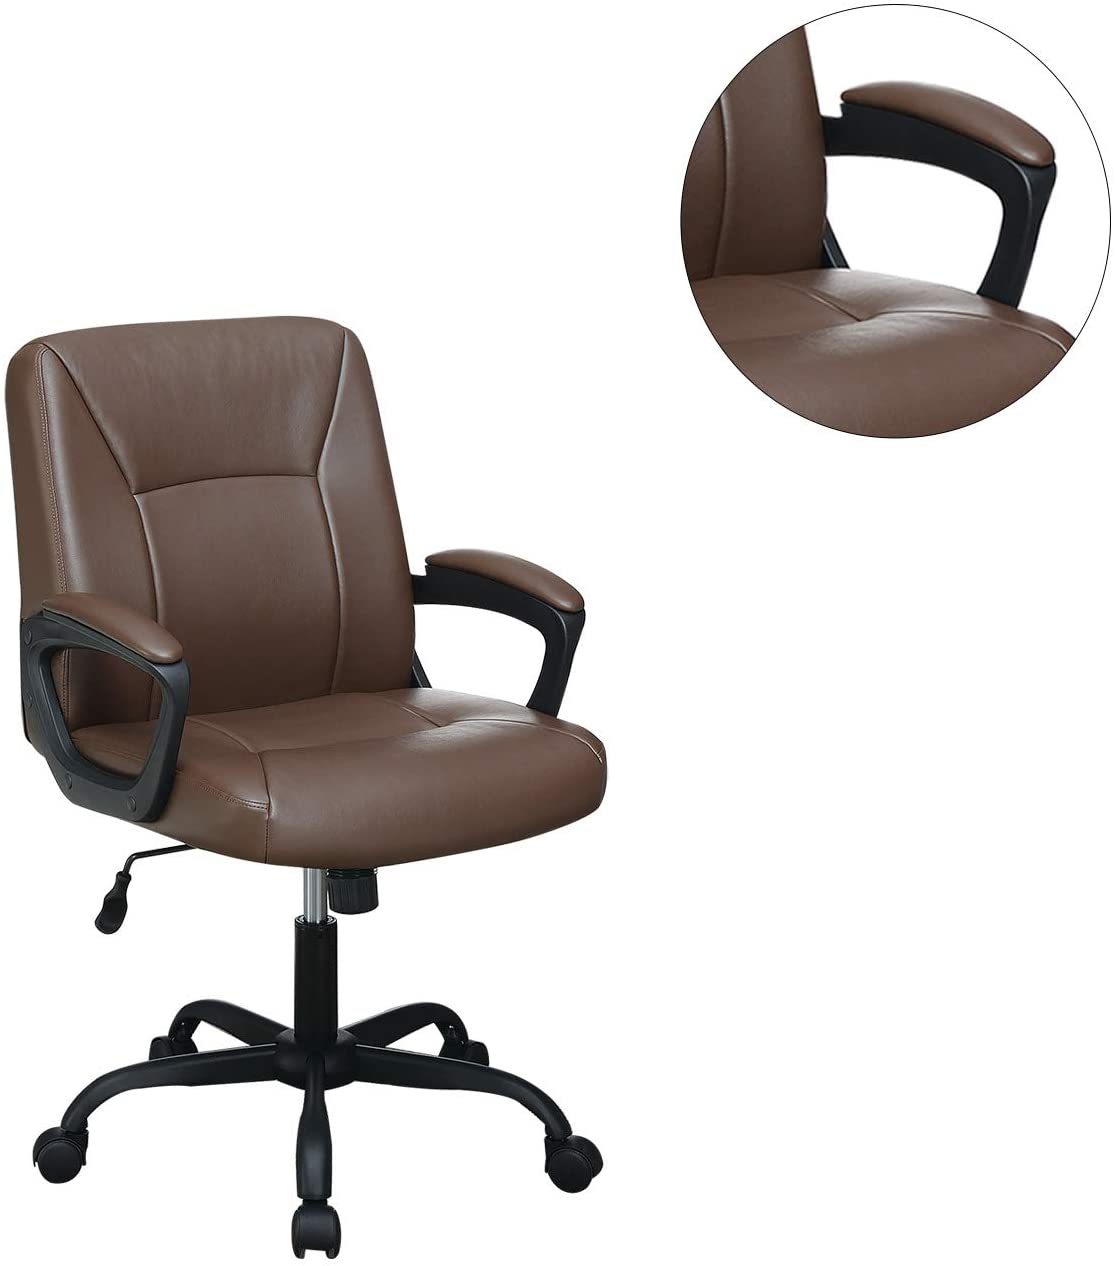 Relax Cushioned Office Chair 1pc Brown Color brown-office-contemporary-office chairs-solid